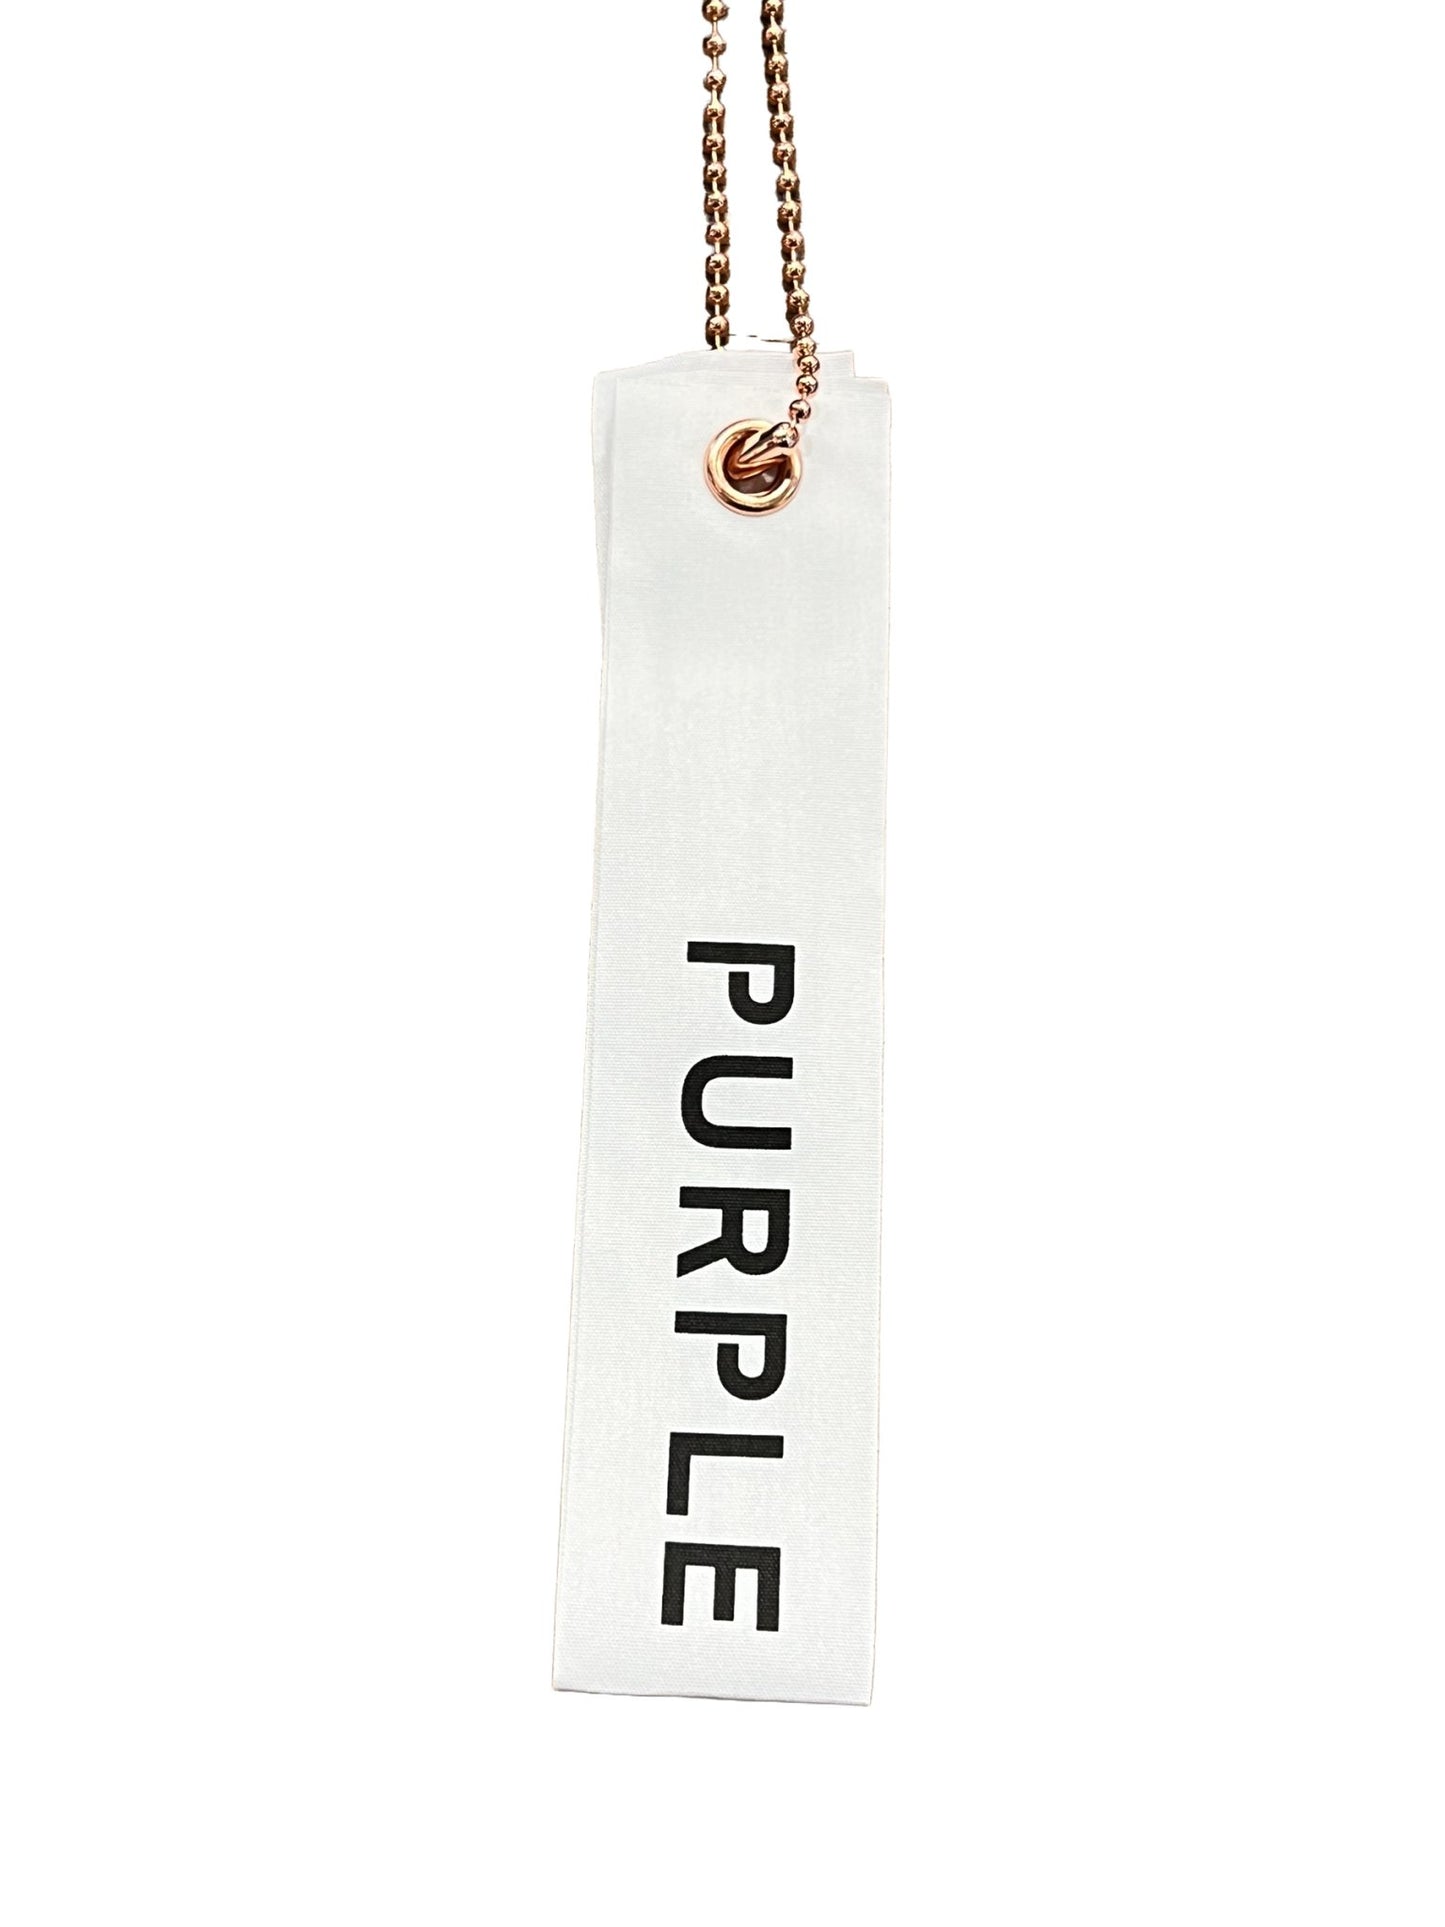 A white rectangular tag hanging by a copper chain with the words "PURPLE BRAND P446-FWHG FRENCH TERRY SWEATSHORTS HEATHER" printed in black capital letters.